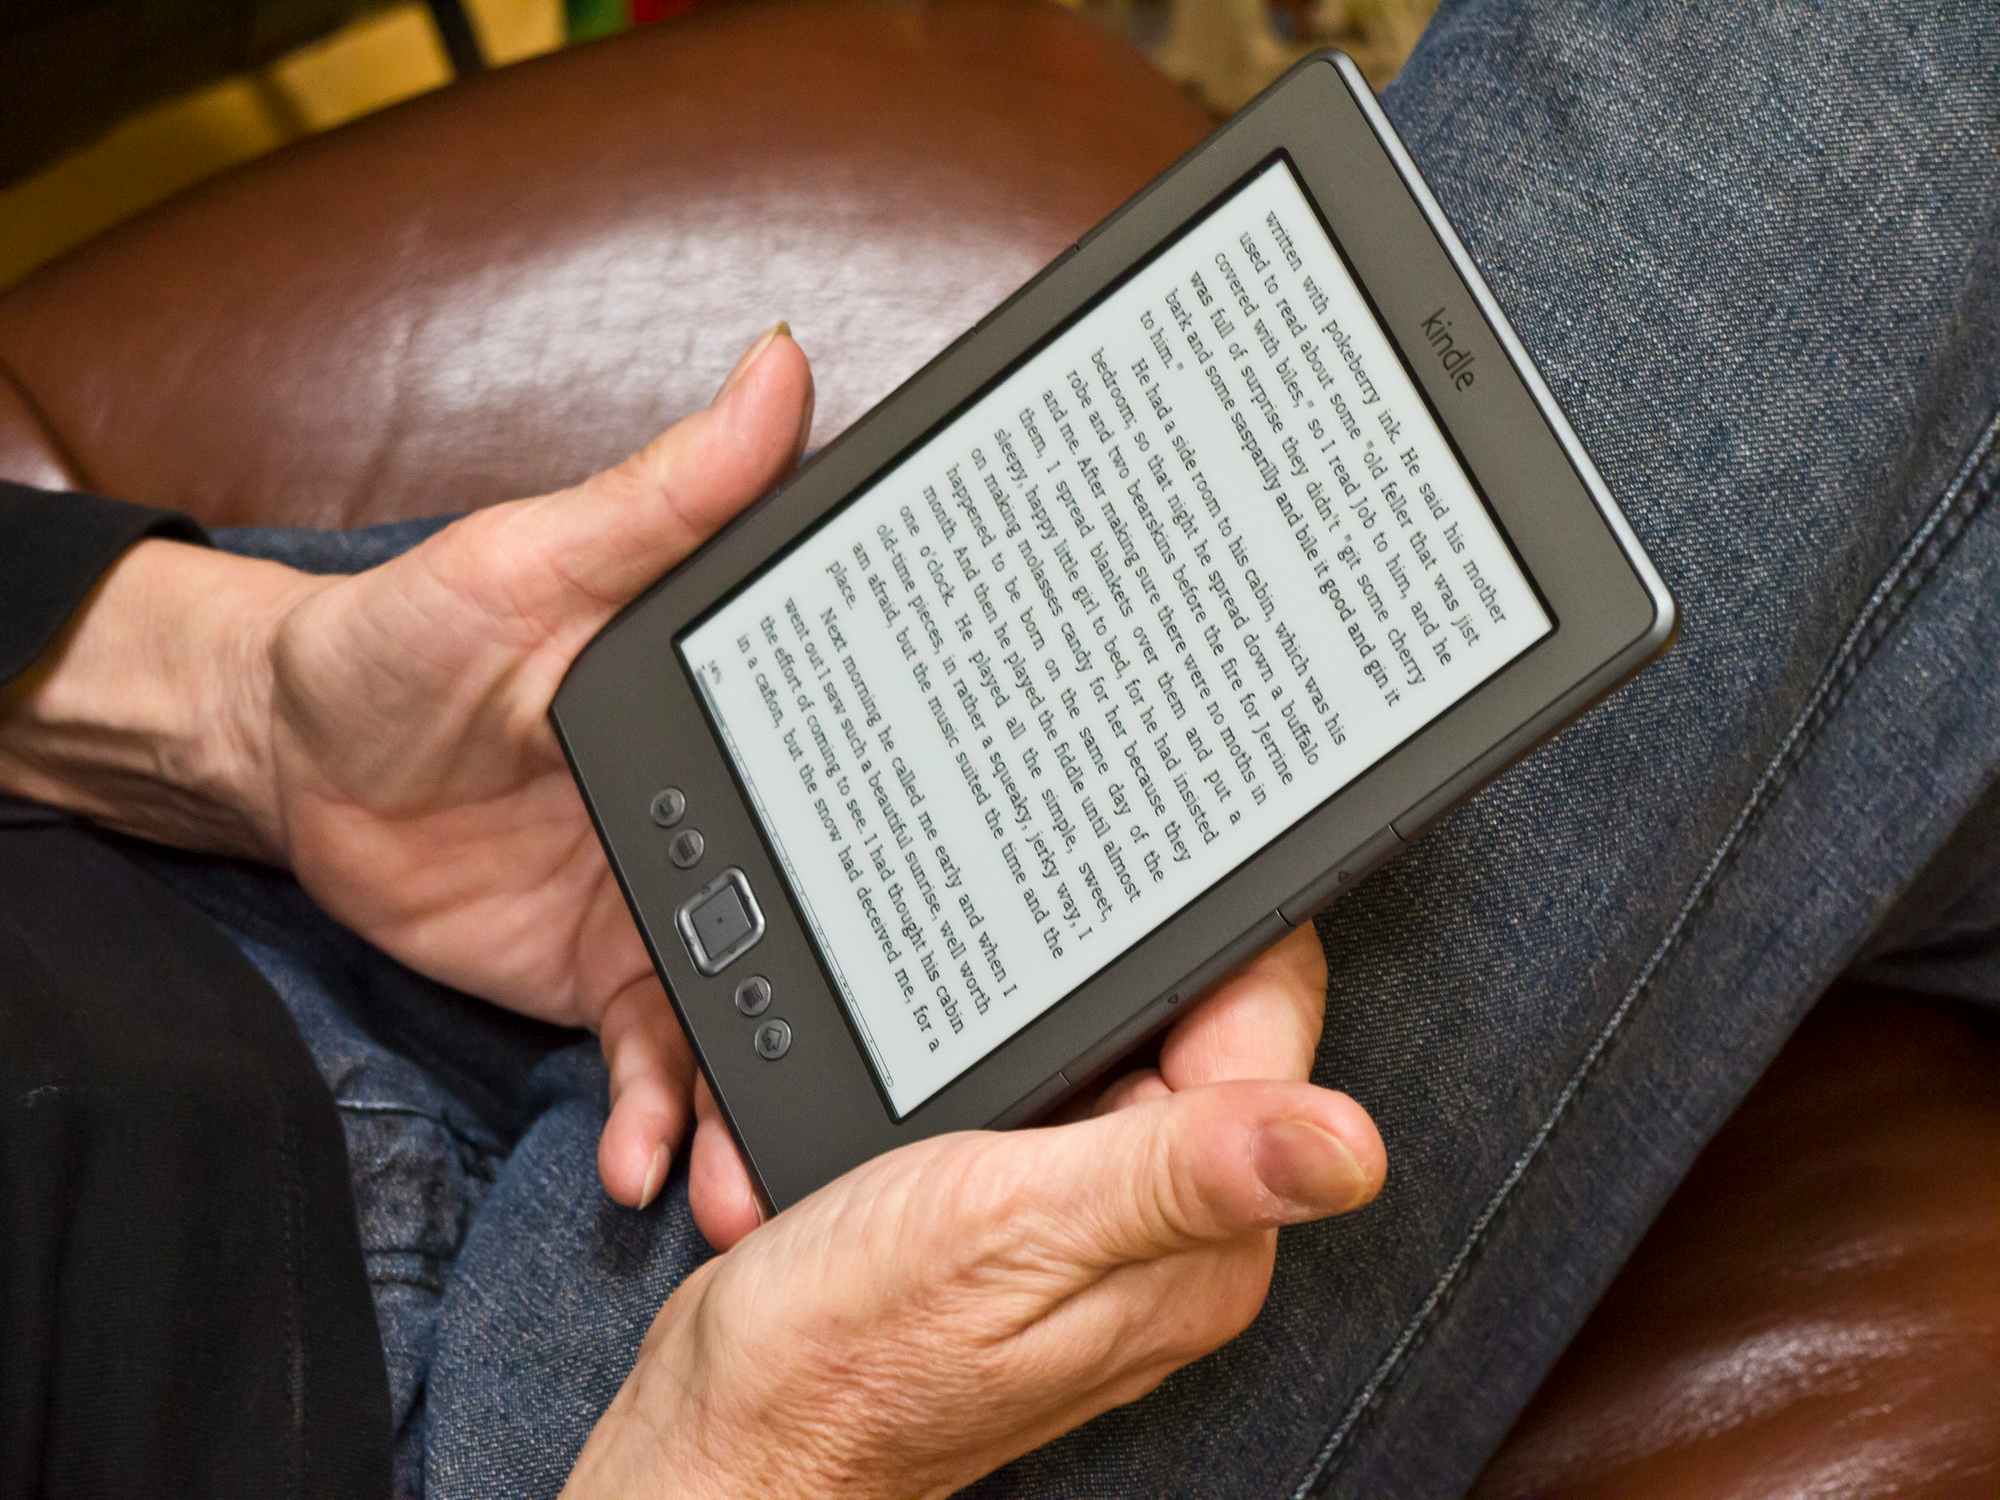 A person sitting on a couch and holding an Amazon Kindle displaying a page of a book.